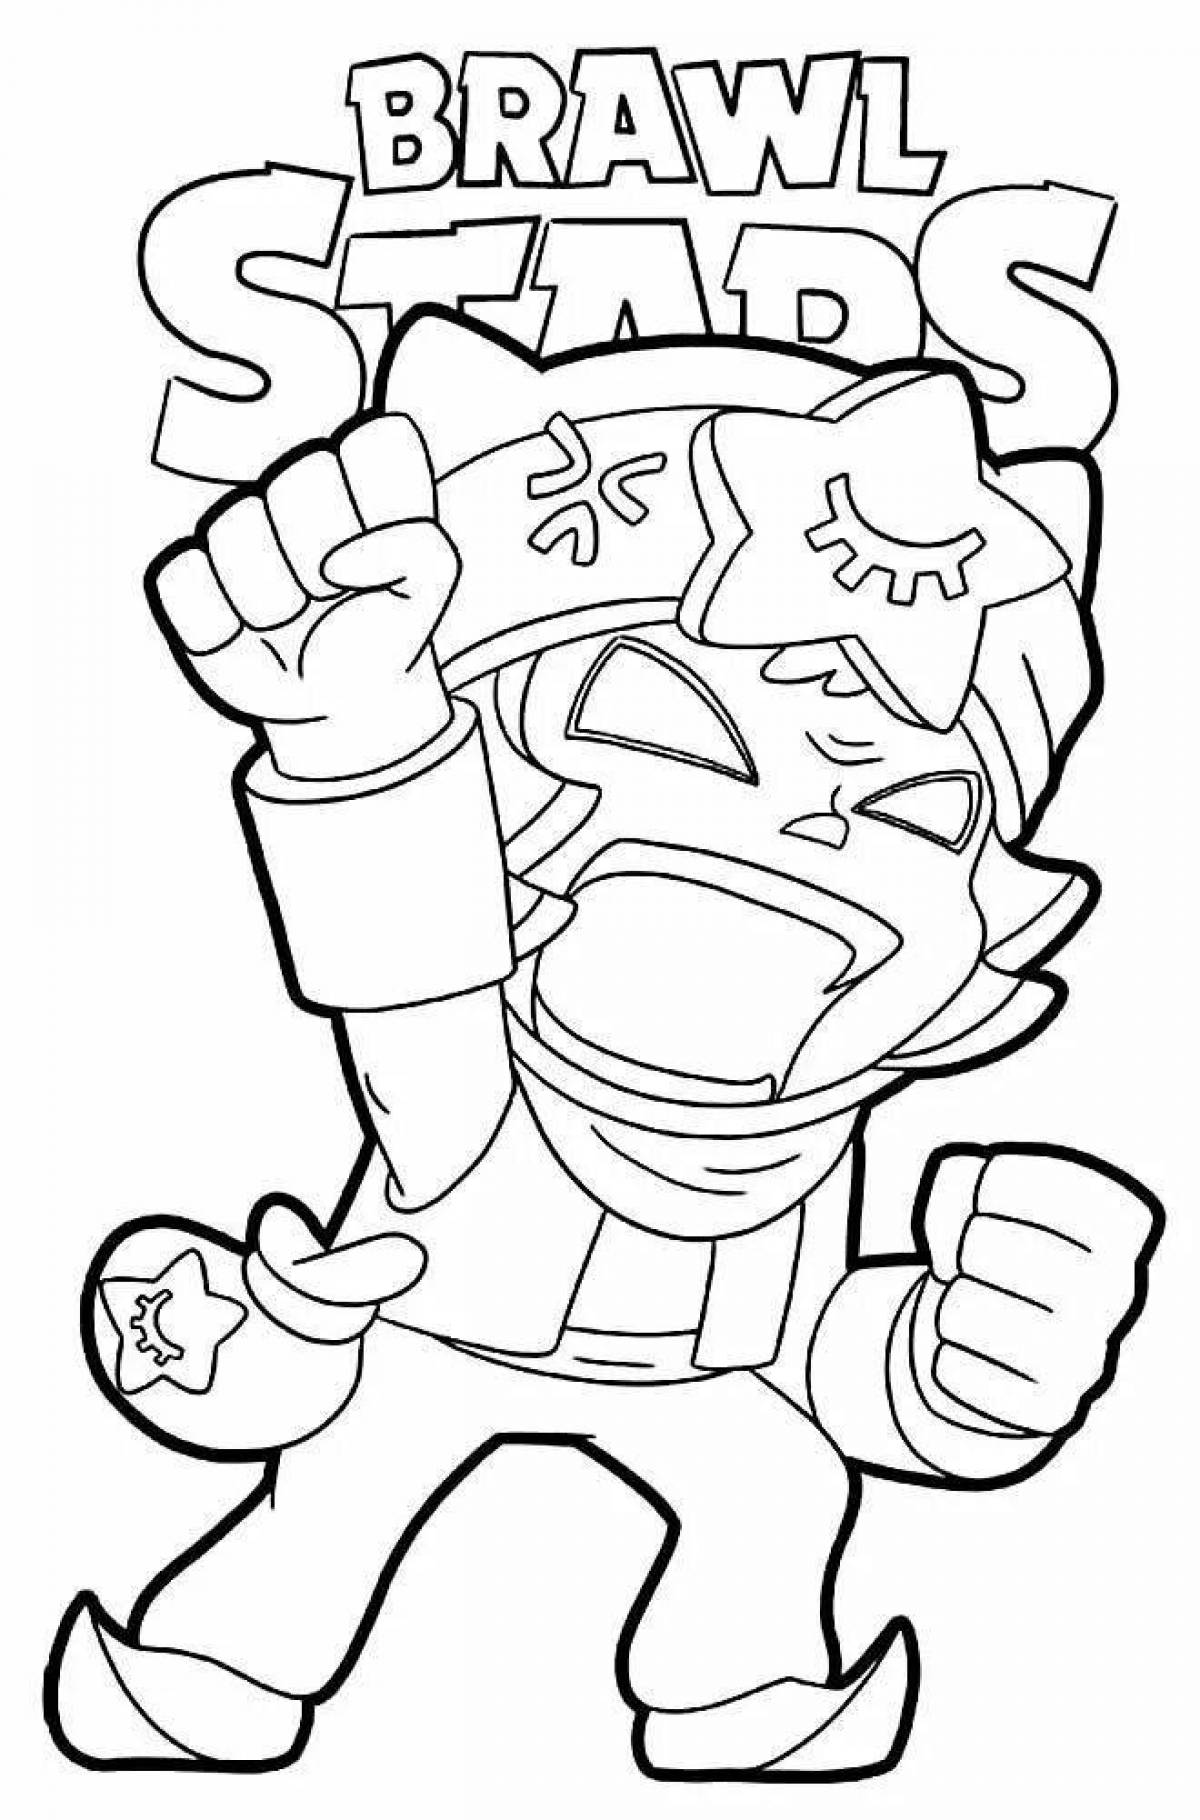 Coloring page energetic bull